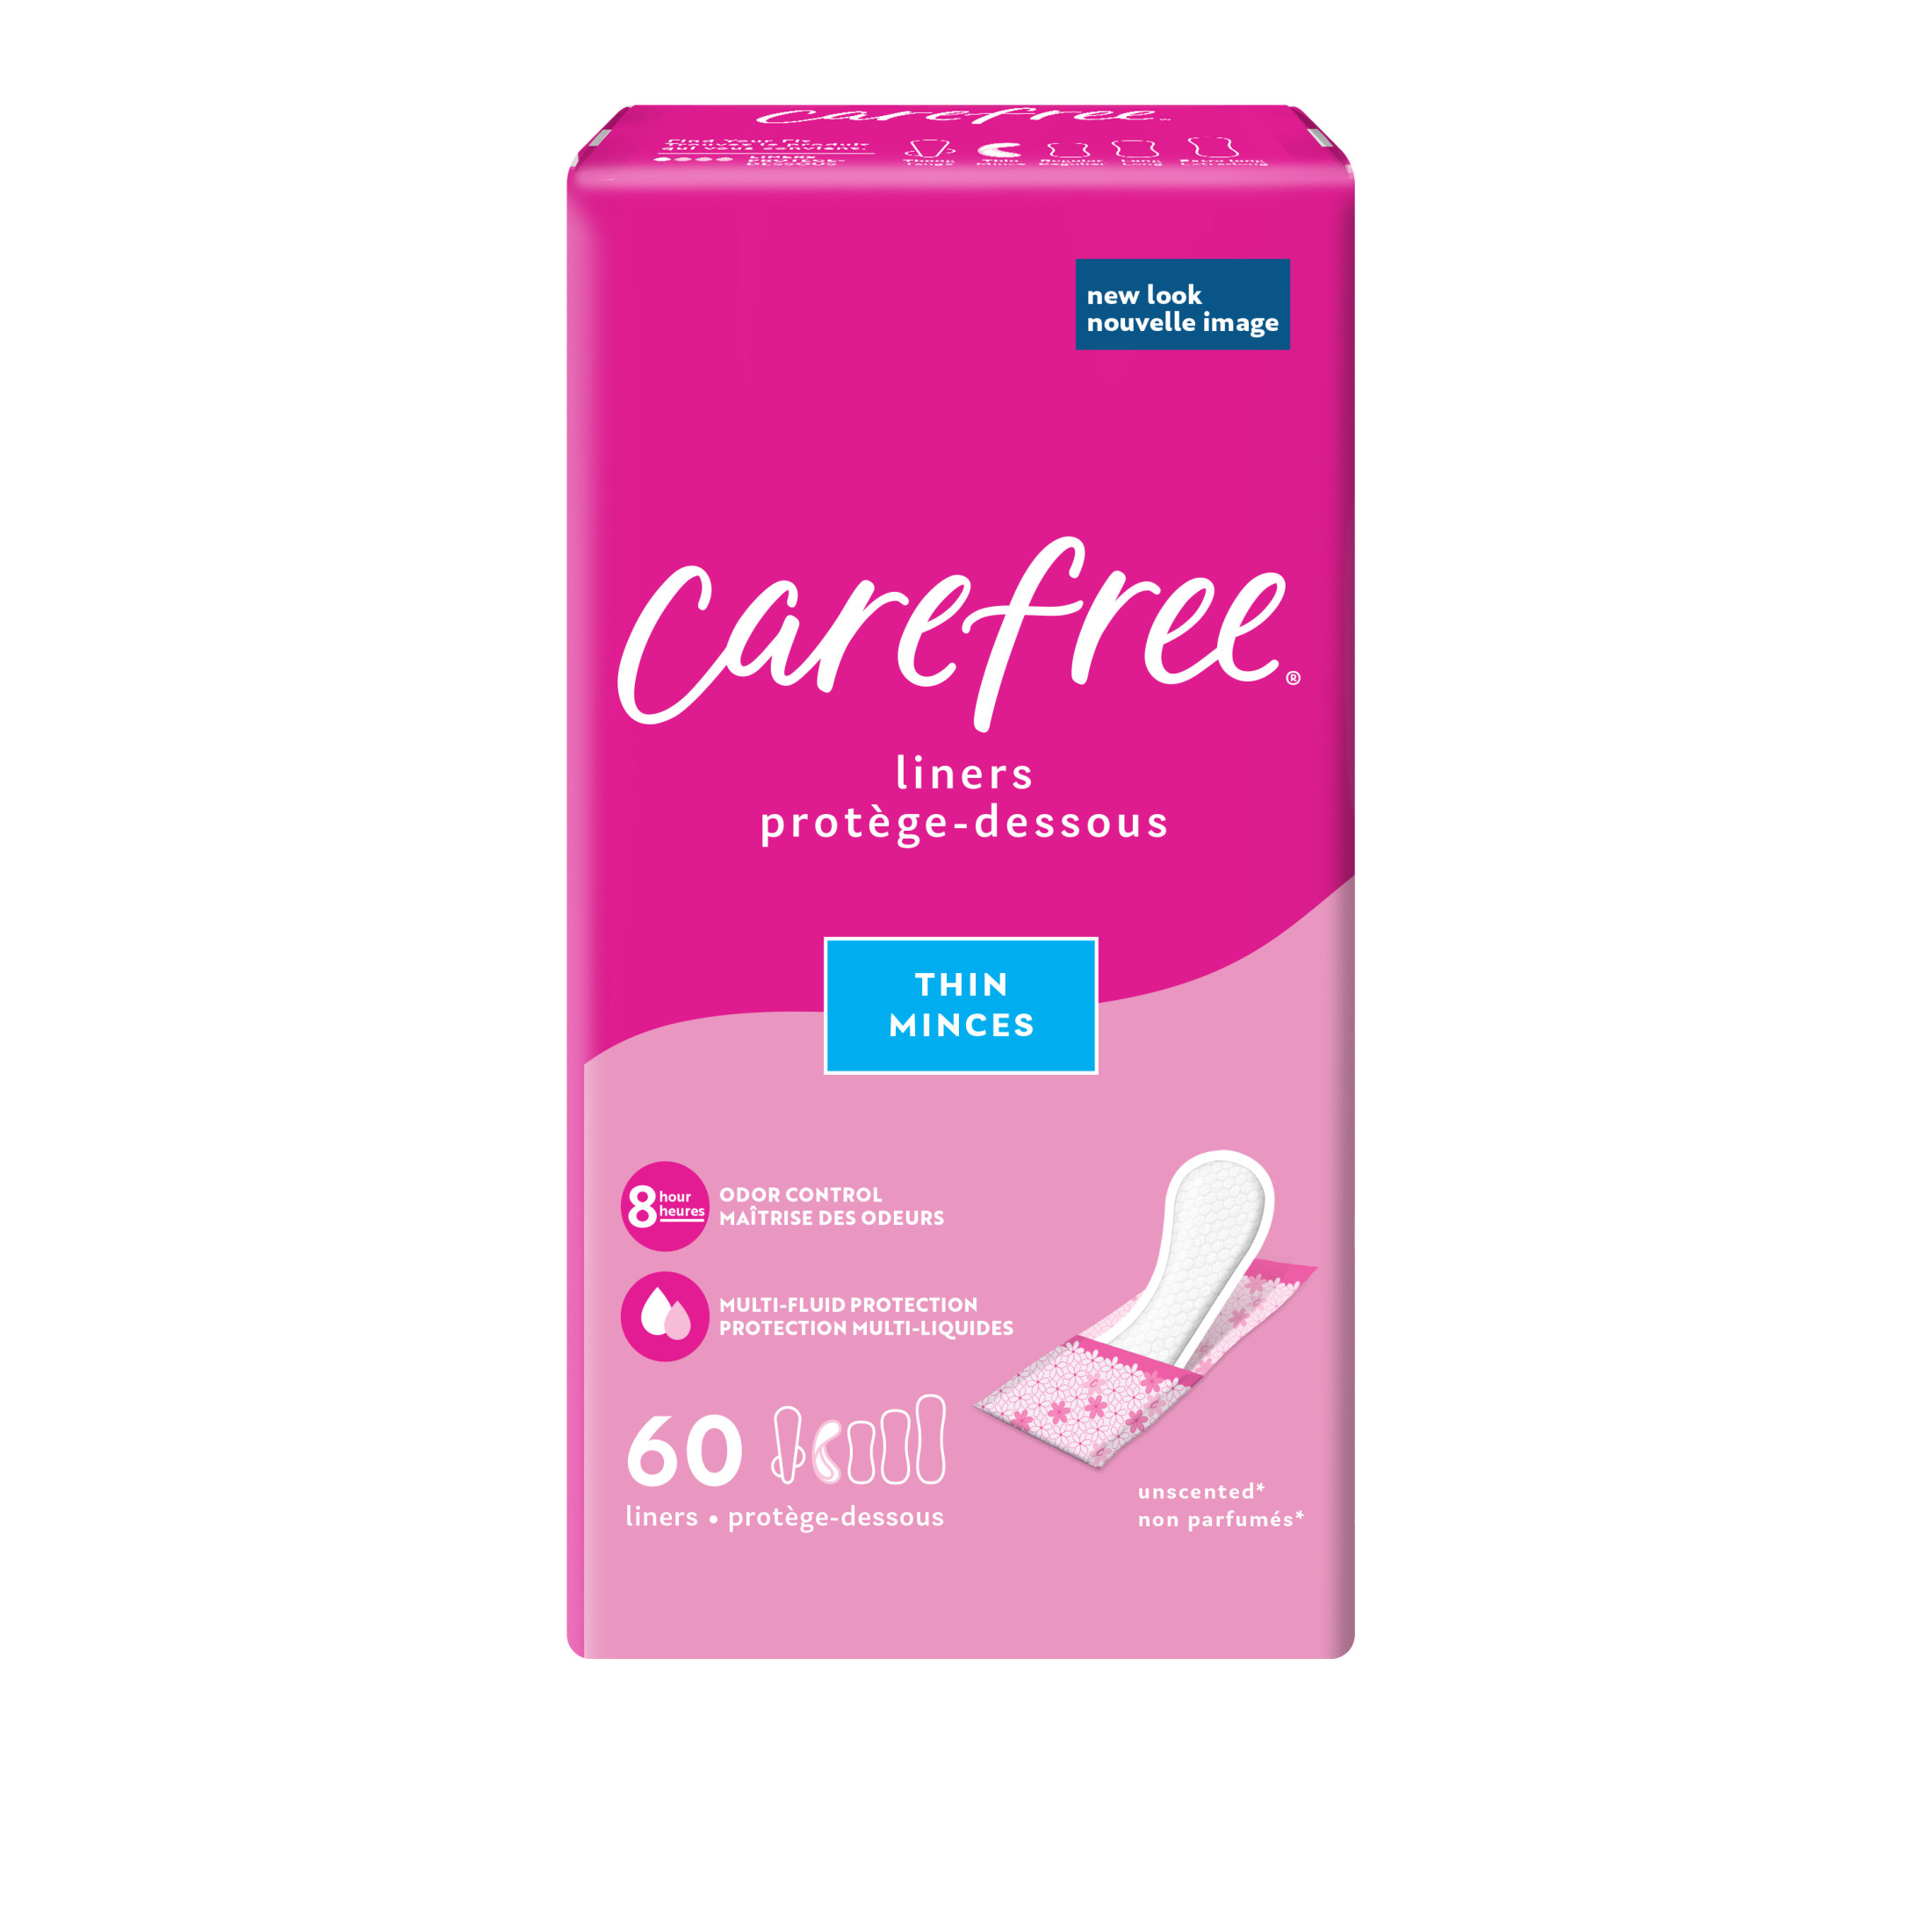 CAREFREE® Panty Liners, Thin To Go, Unscented, 8 Hour Odor Control, 60ct - image 2 of 10